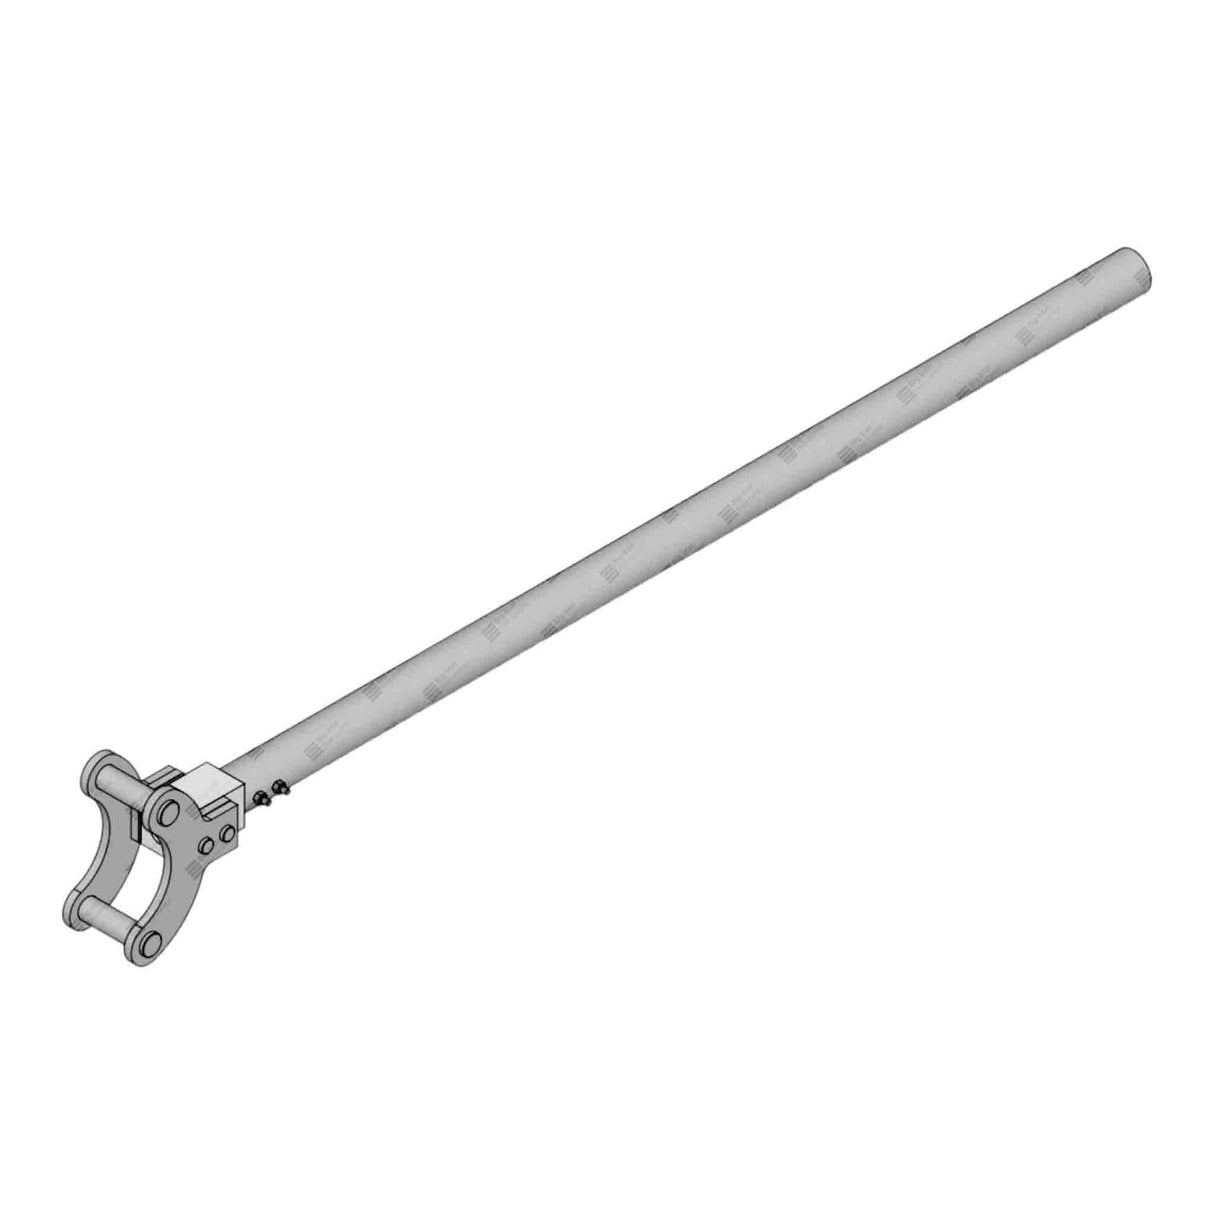 Wing Nut Wrench, 3" 602, 4 FT